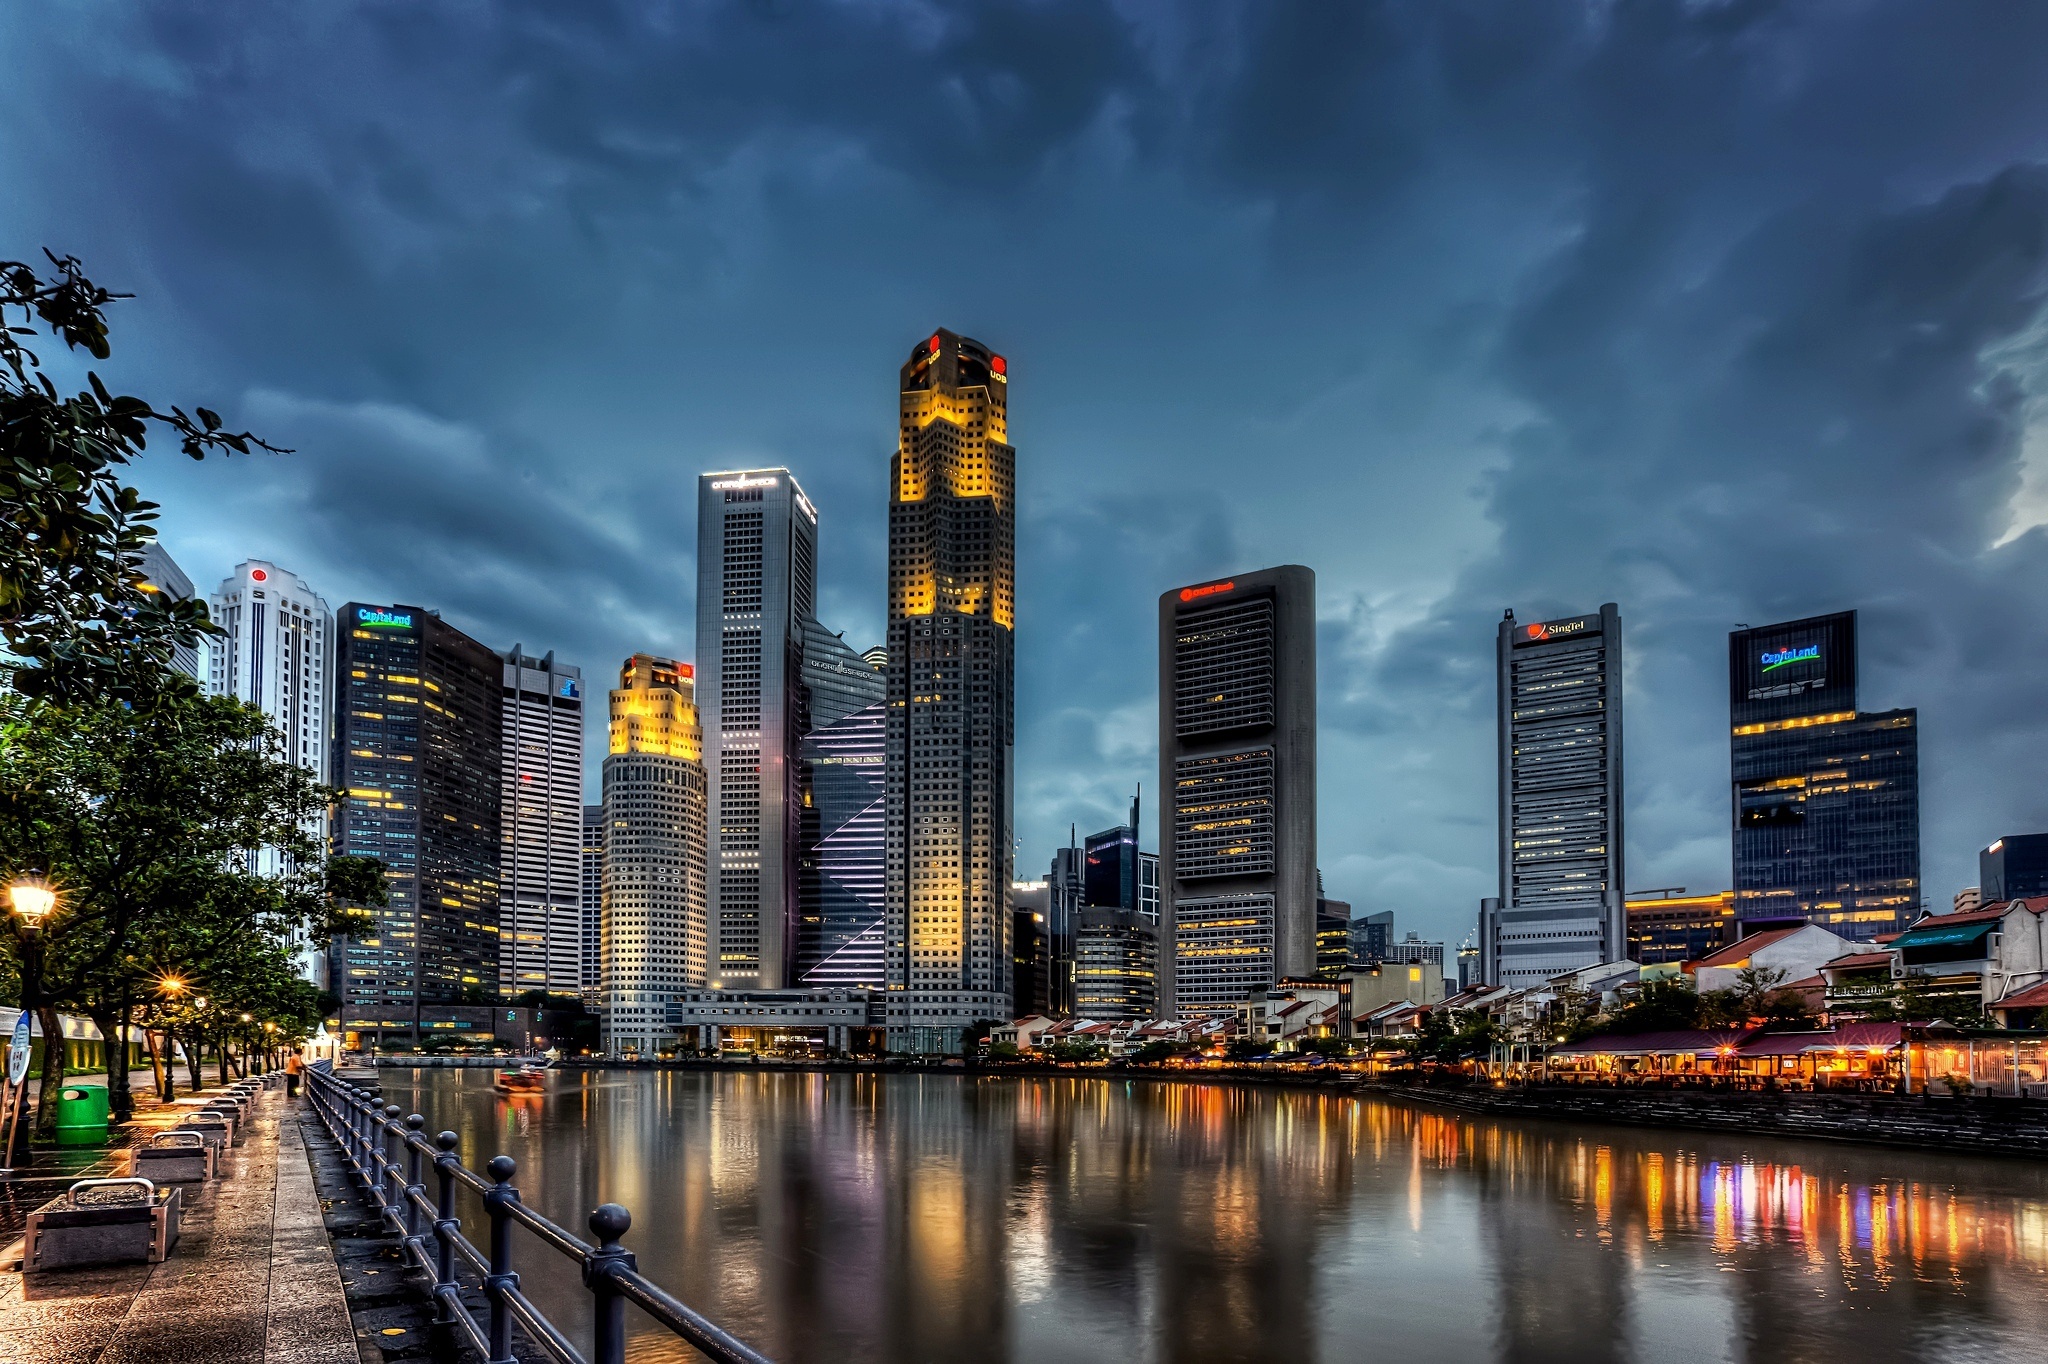 Singapore Hd Wallpapers